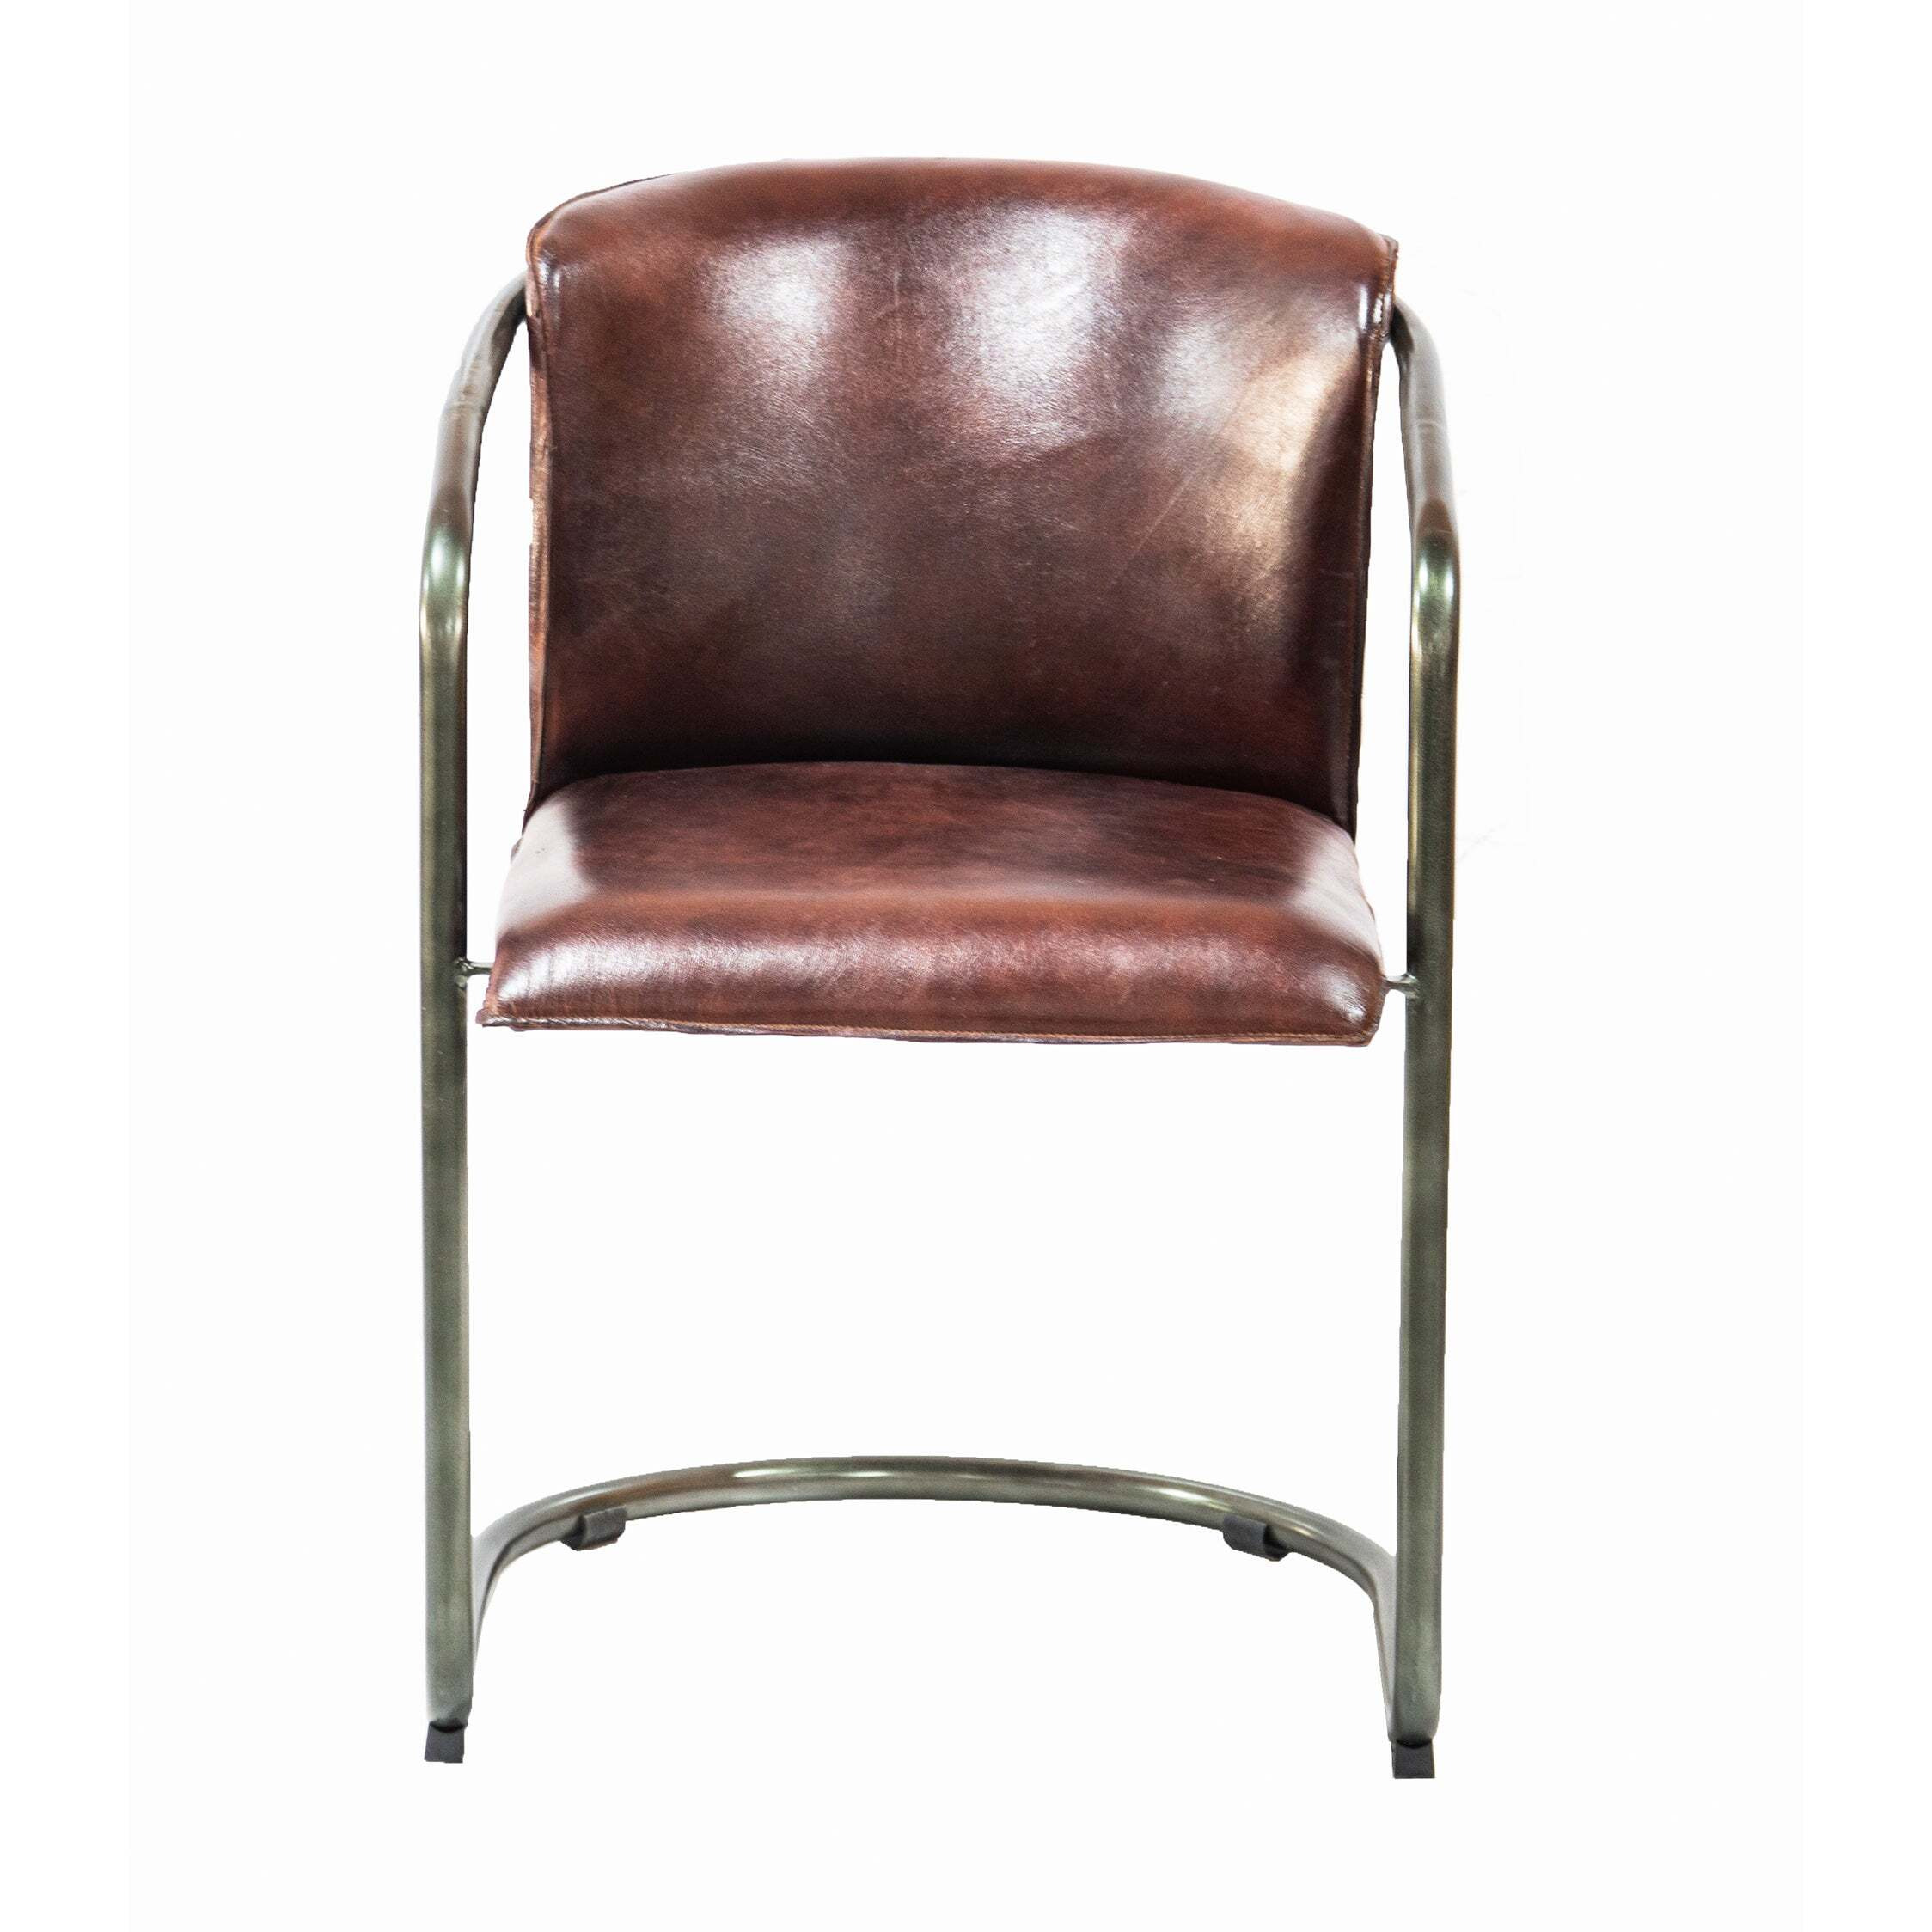 Industrial Metal Frame Chair with Leather Bucket Seat - image 1